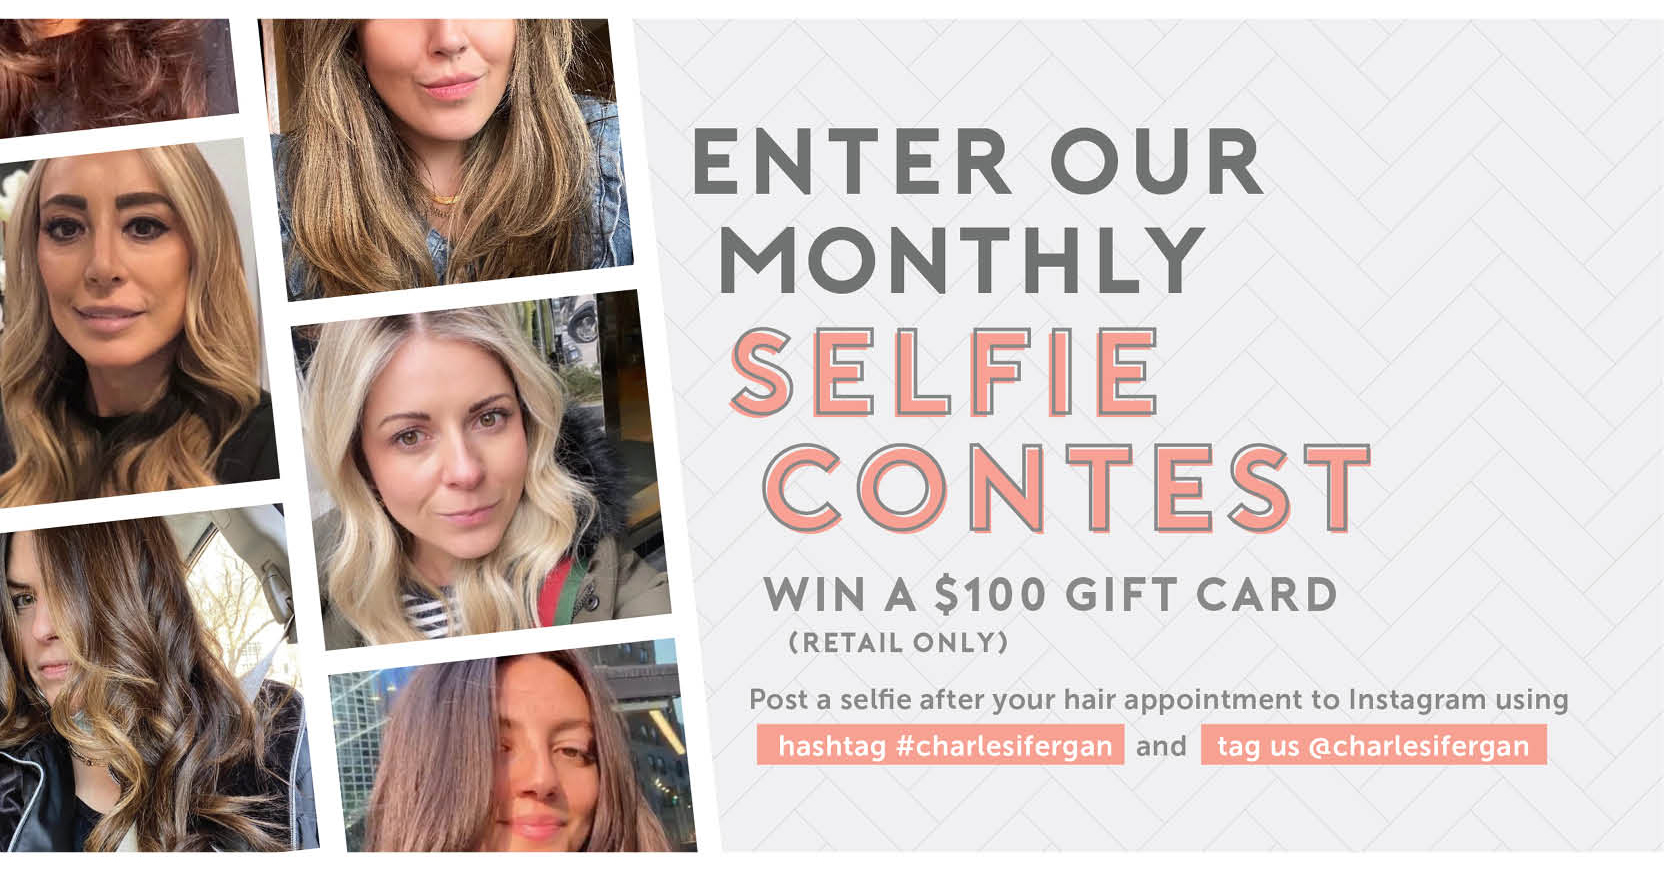 Enter our monthly selfie contest and win a $100 gift card (retail only). Post a selfie after your appointment to Instagram using hashtag #charlesifergan and tag us @charlesifergan